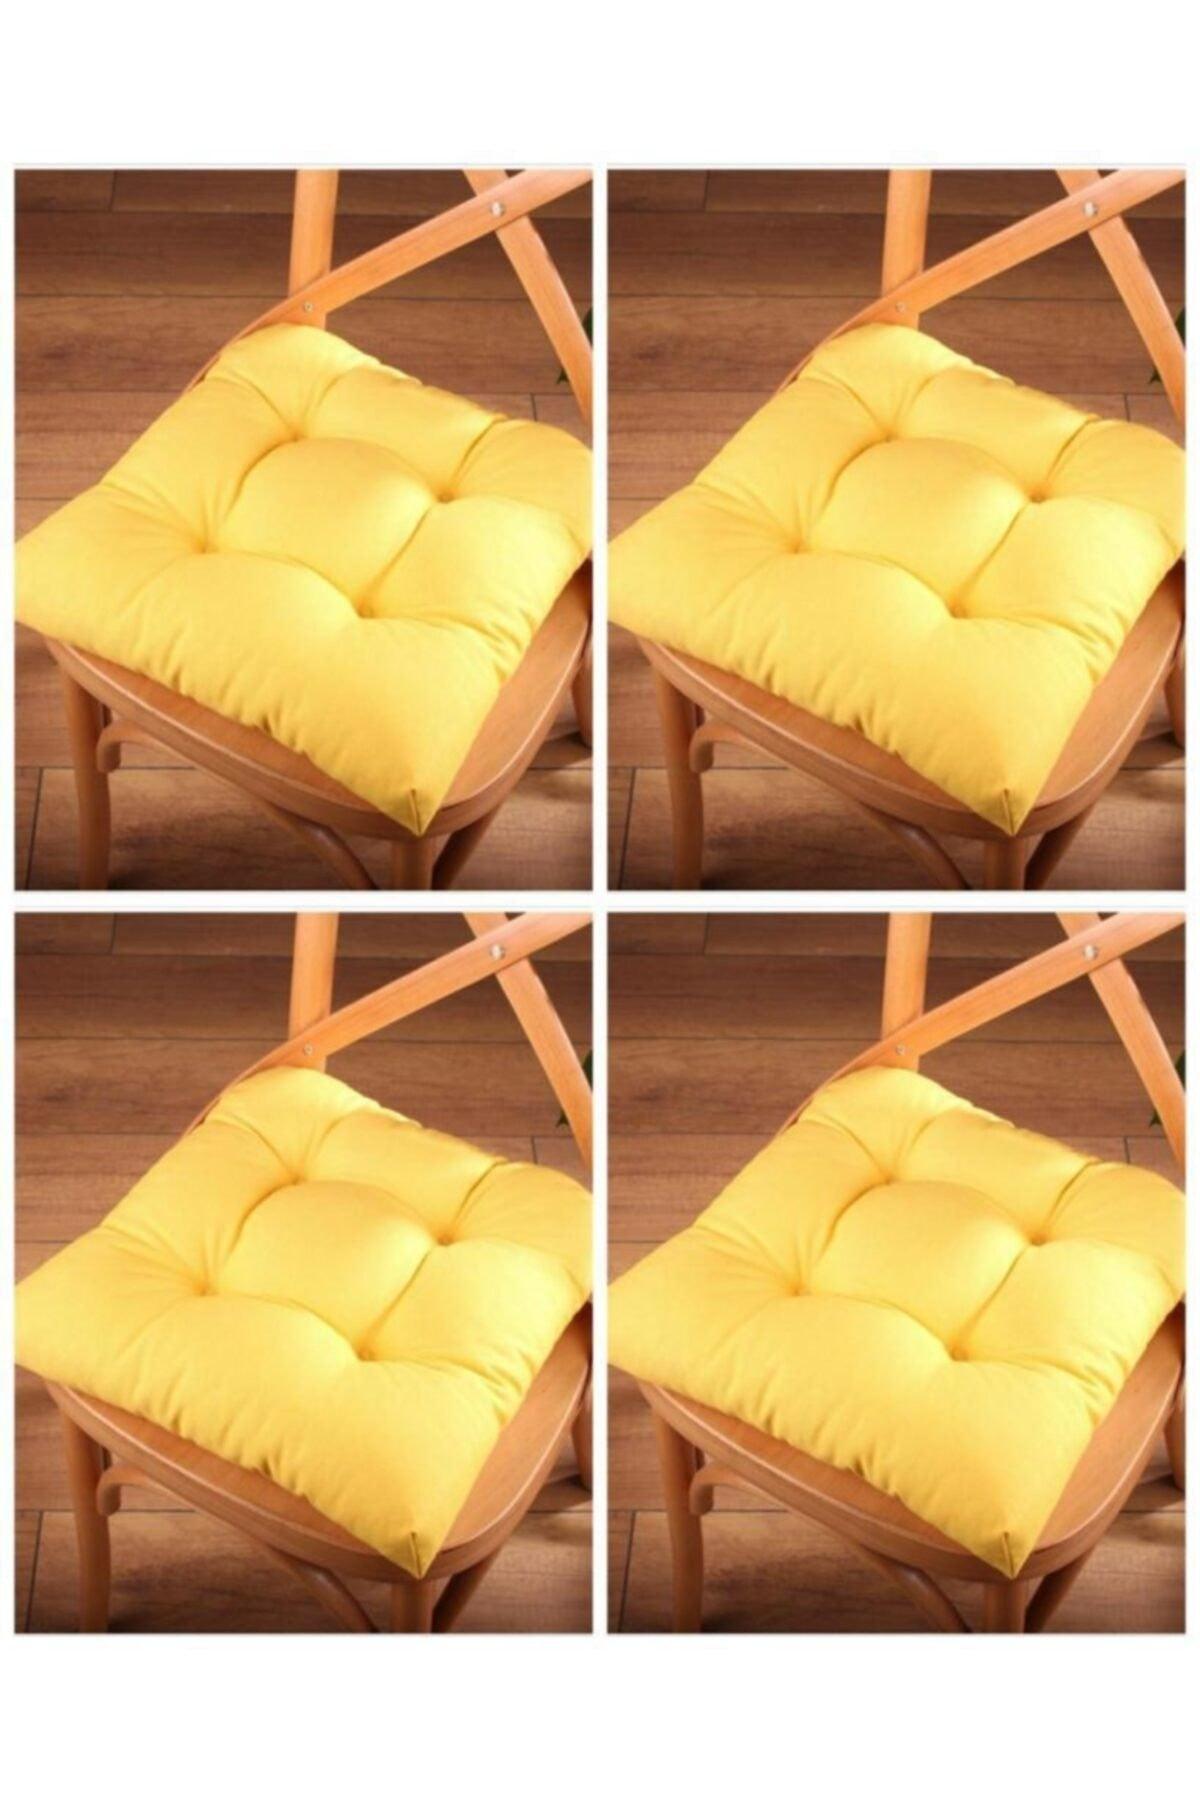 4 Pcs Lux Pofidik Yellow Chair Cushion Special Stitched Laced 40x40cm - Swordslife